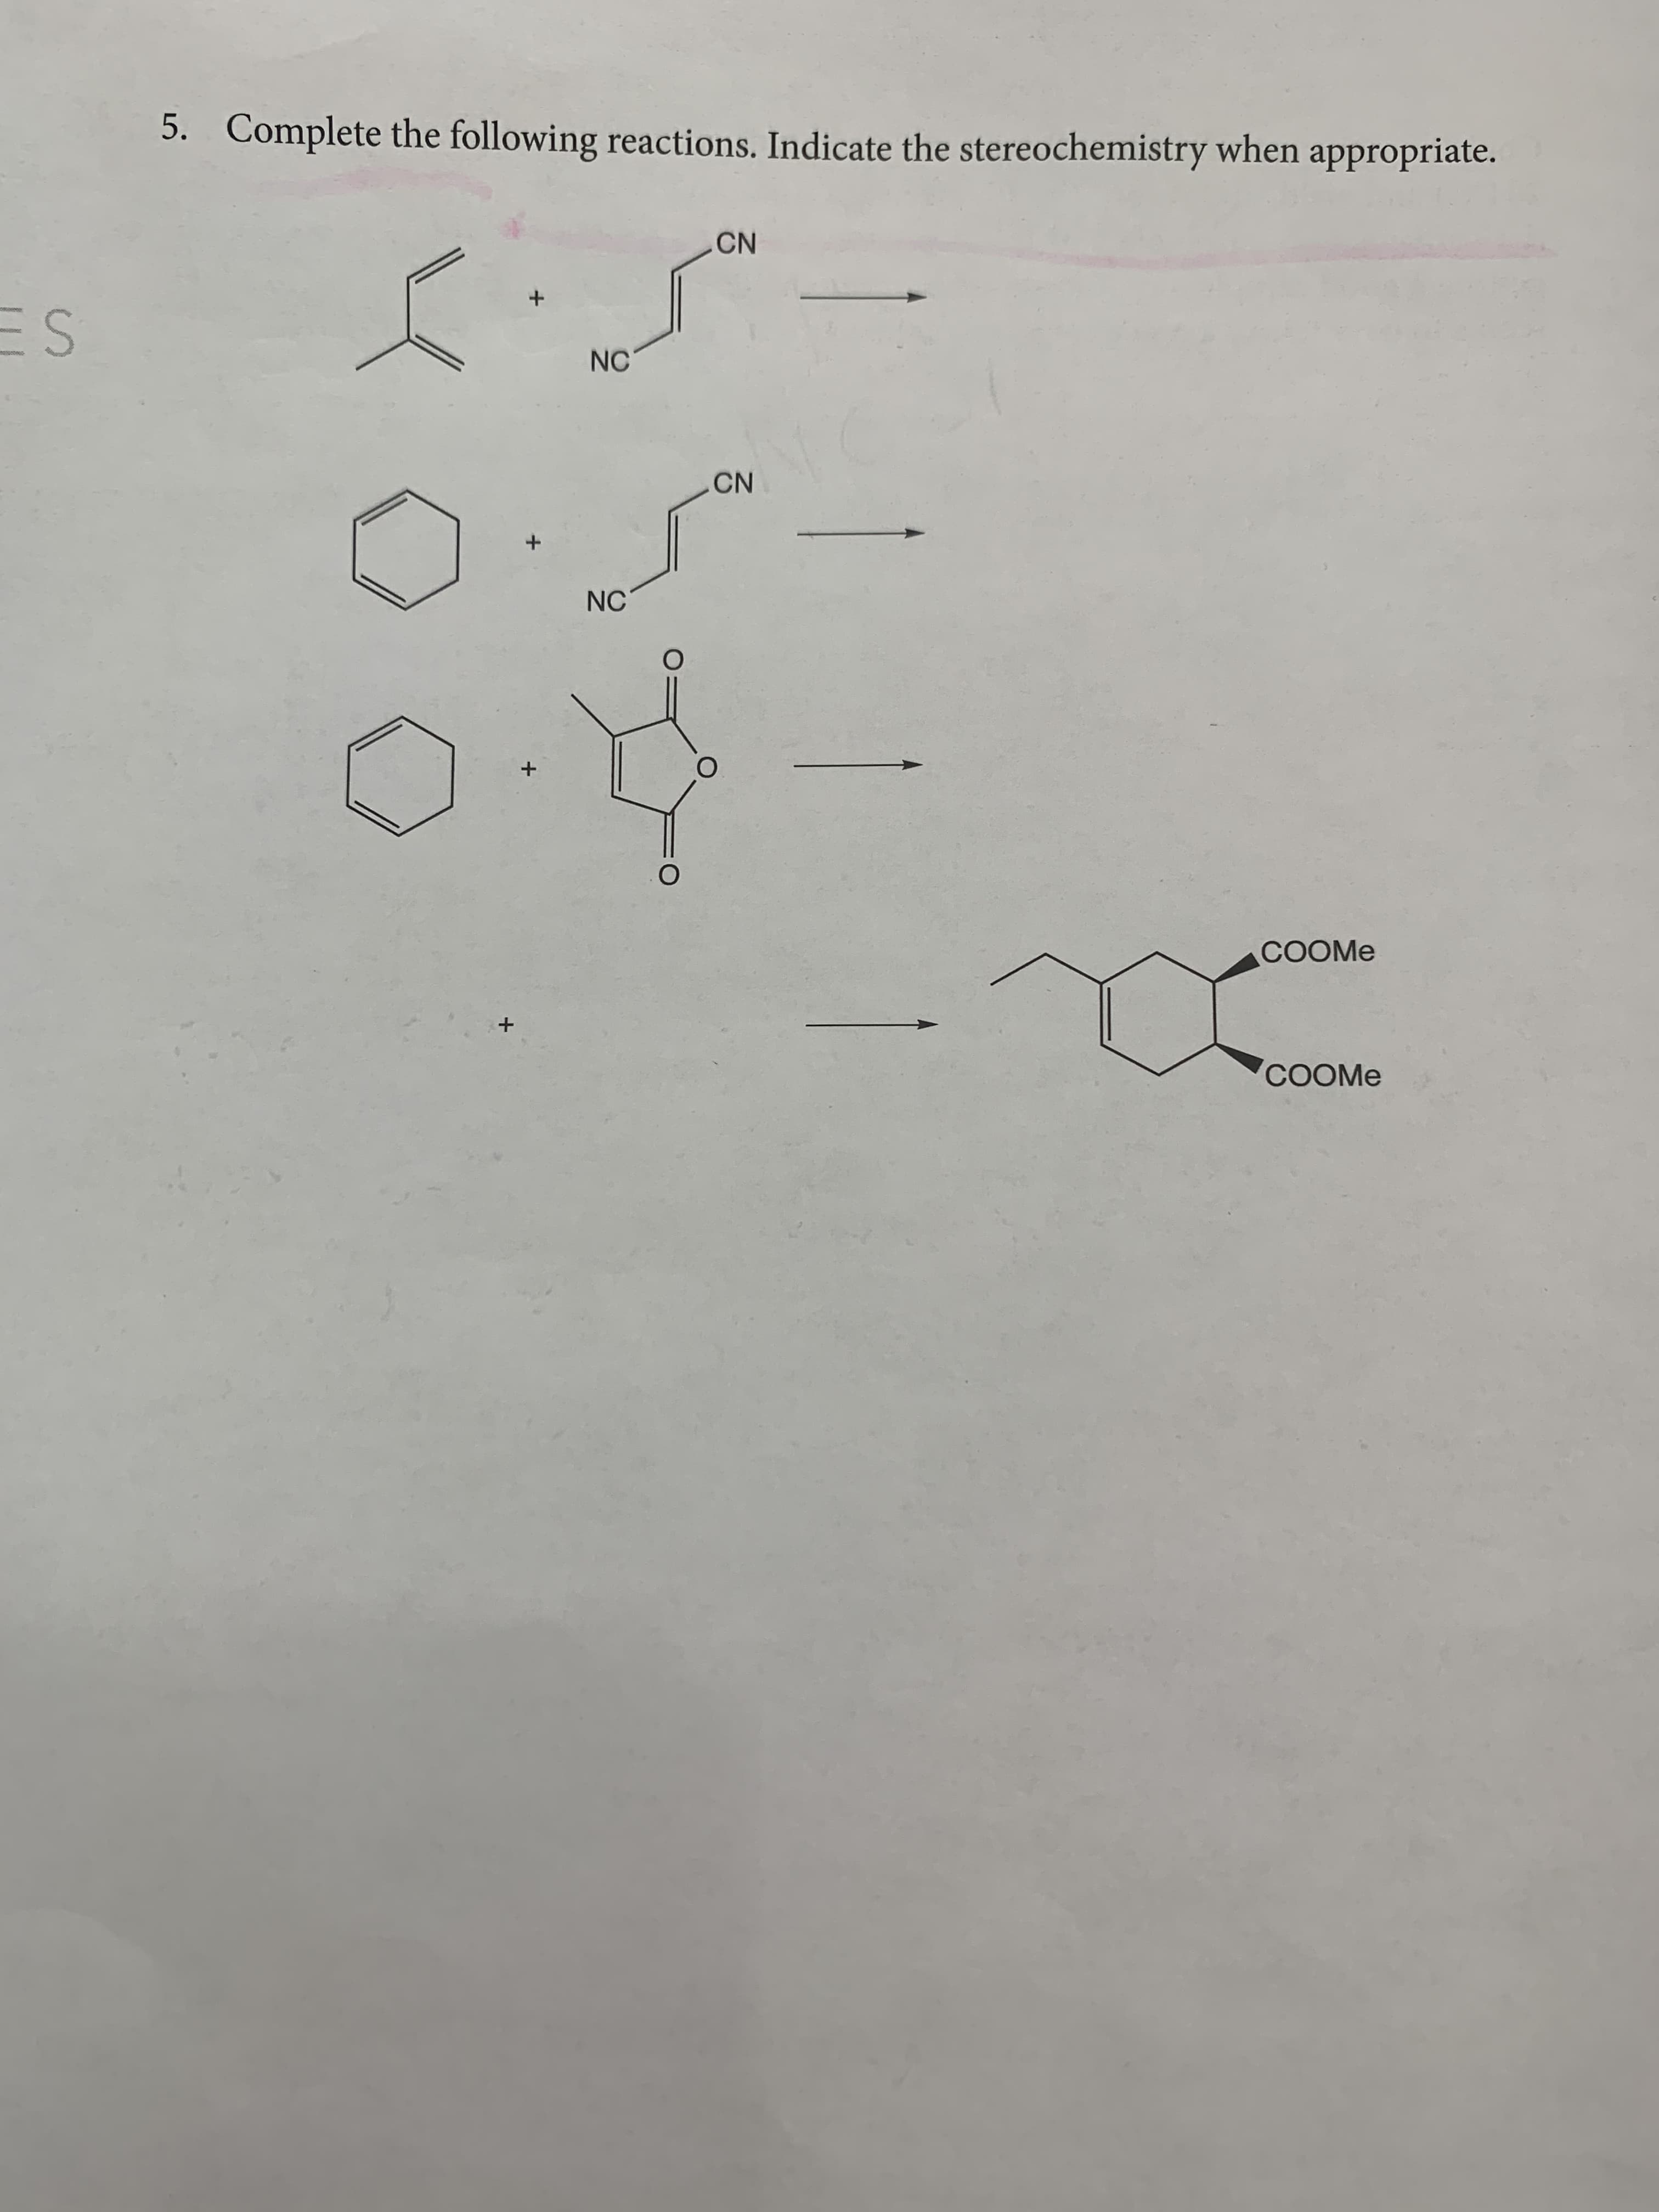 5. Complete the following reactions. Indicate the stereochemistry when appropriate.
CN
NC
CN
NC
メ
COOME
COOME
